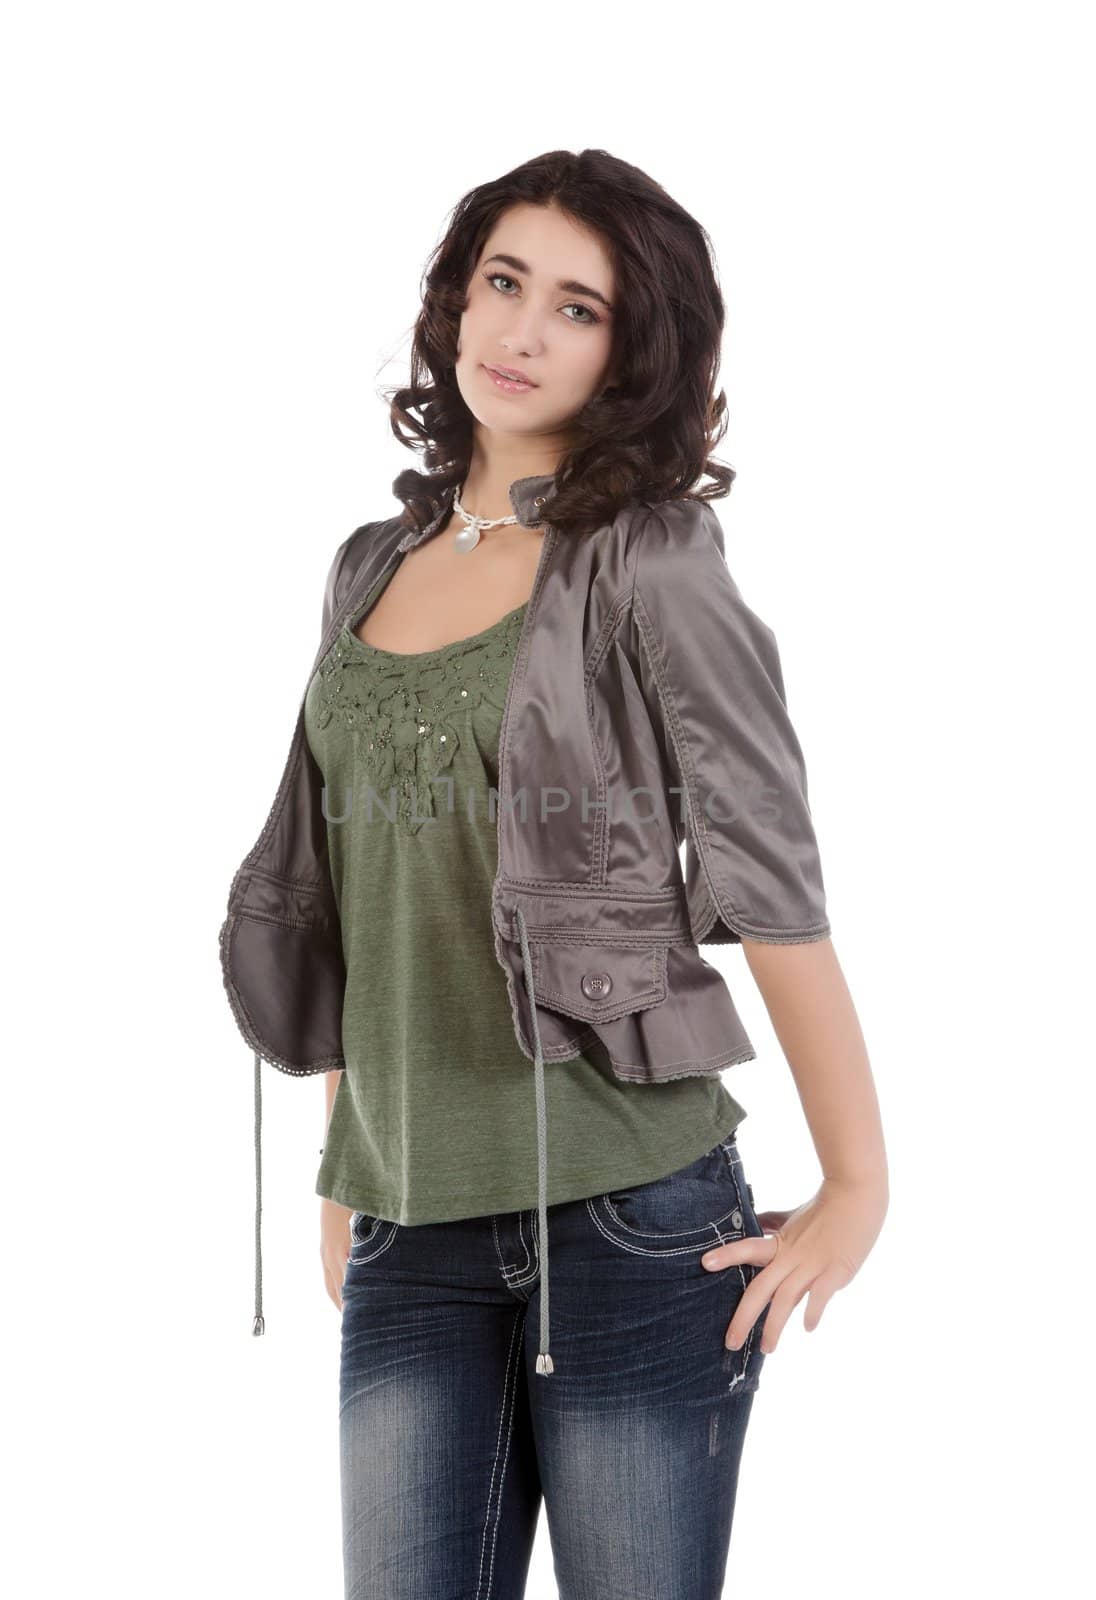 beautiful young teenage woman by clearviewstock